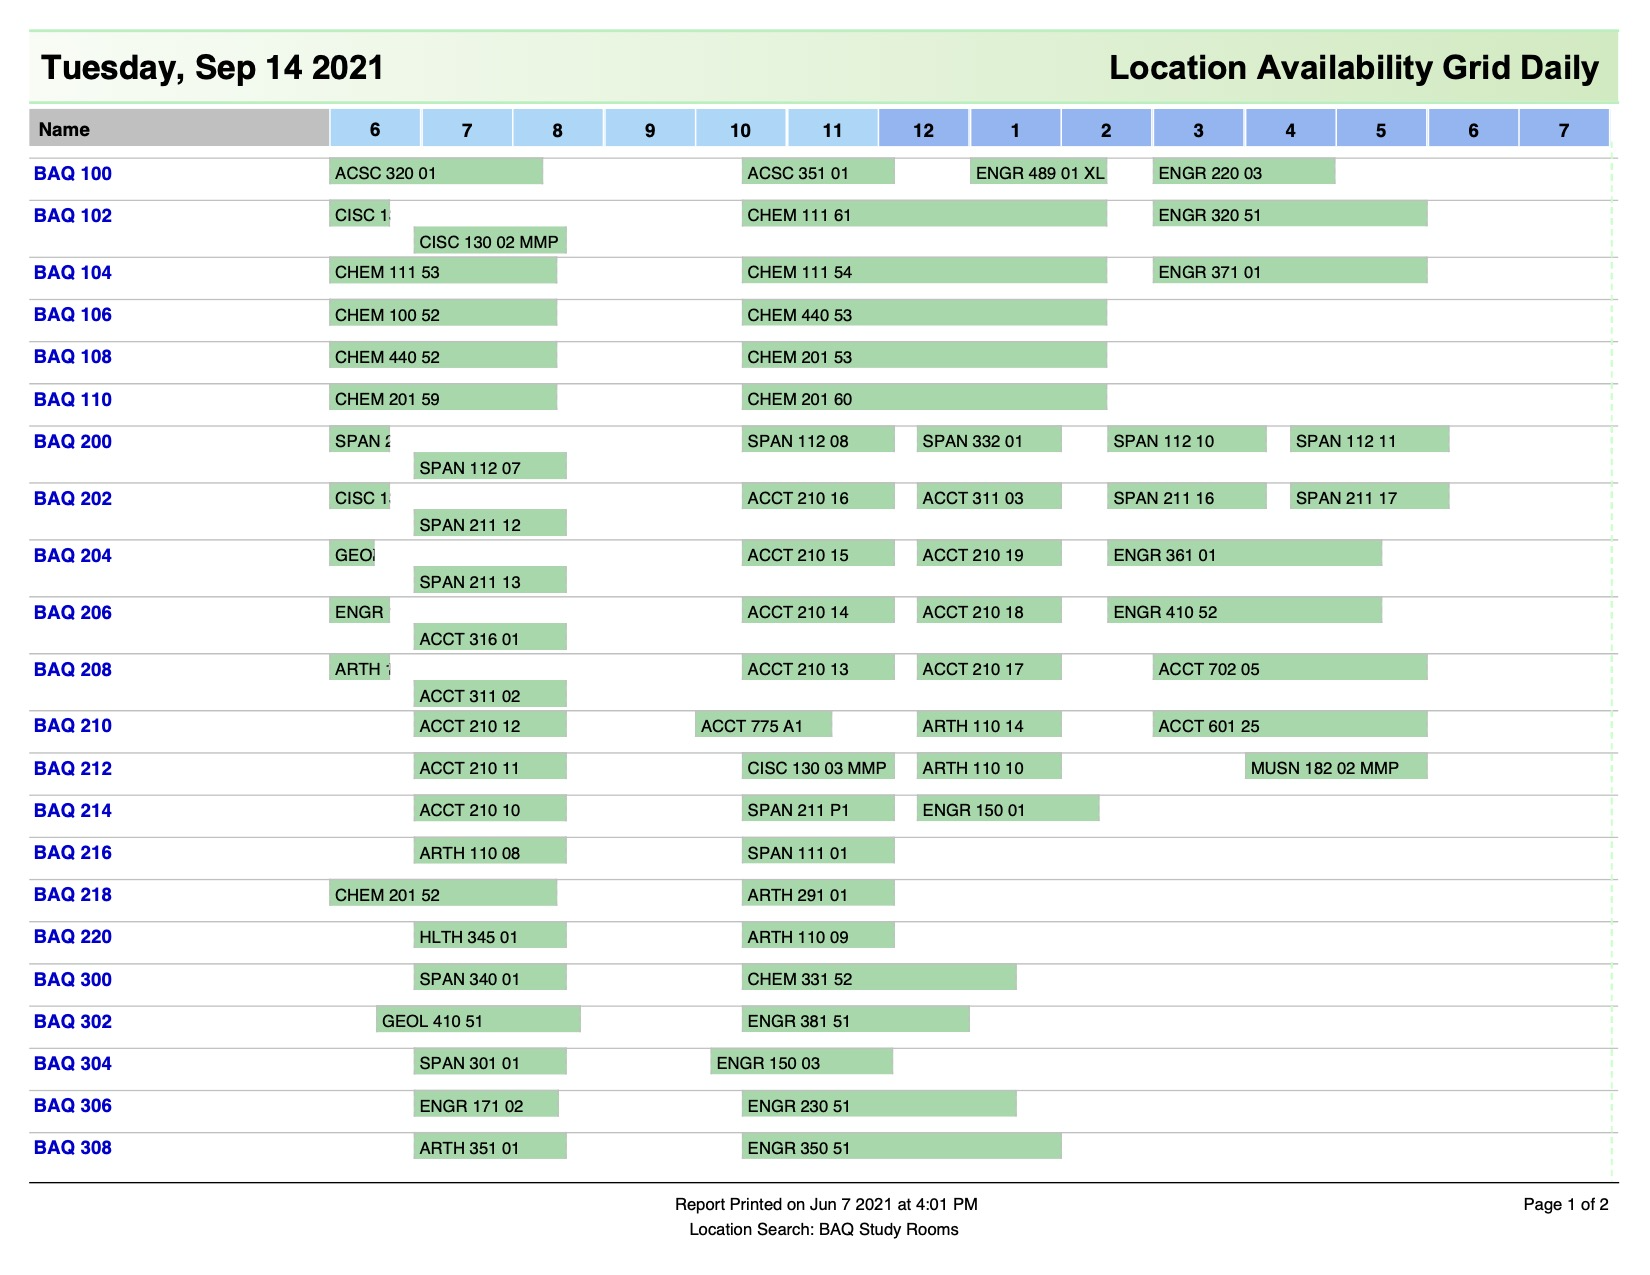 Location availability grid daily example